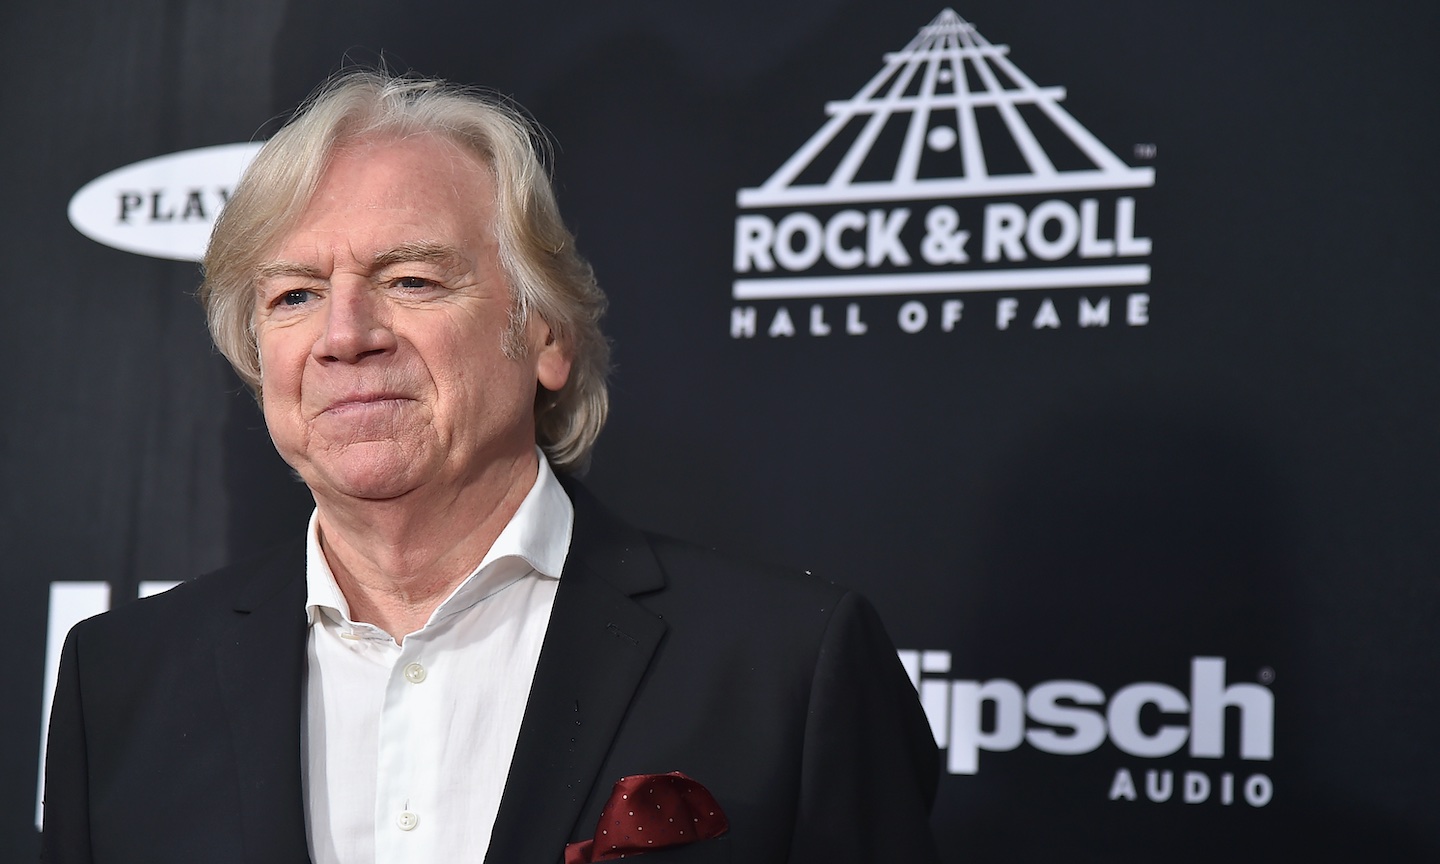 Justin Hayward To Host On The Blue Cruise With Zombies, Dave Mason